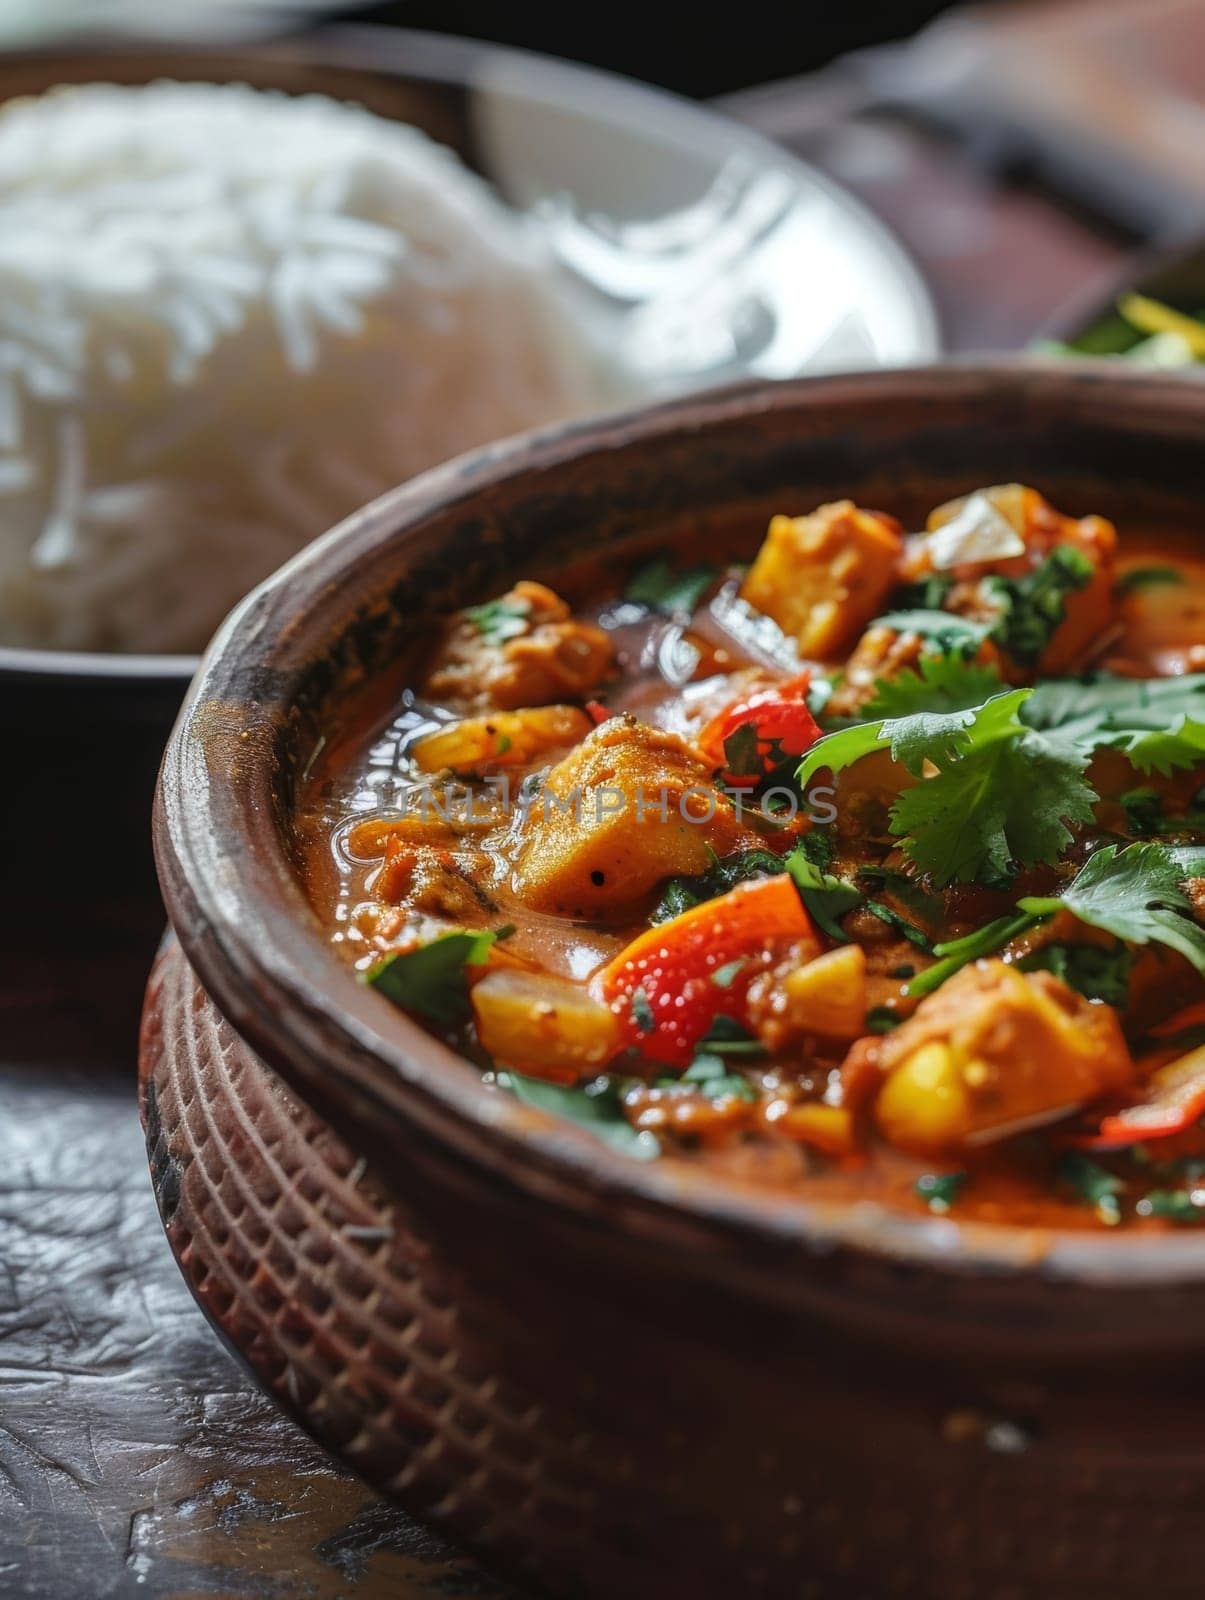 A close-up of a spicy and fragrant Indian curry, simmered to perfection in a traditional clay pot and served alongside fluffy basmati rice, showcasing the bold flavors and authentic of Indian cuisine. by sfinks